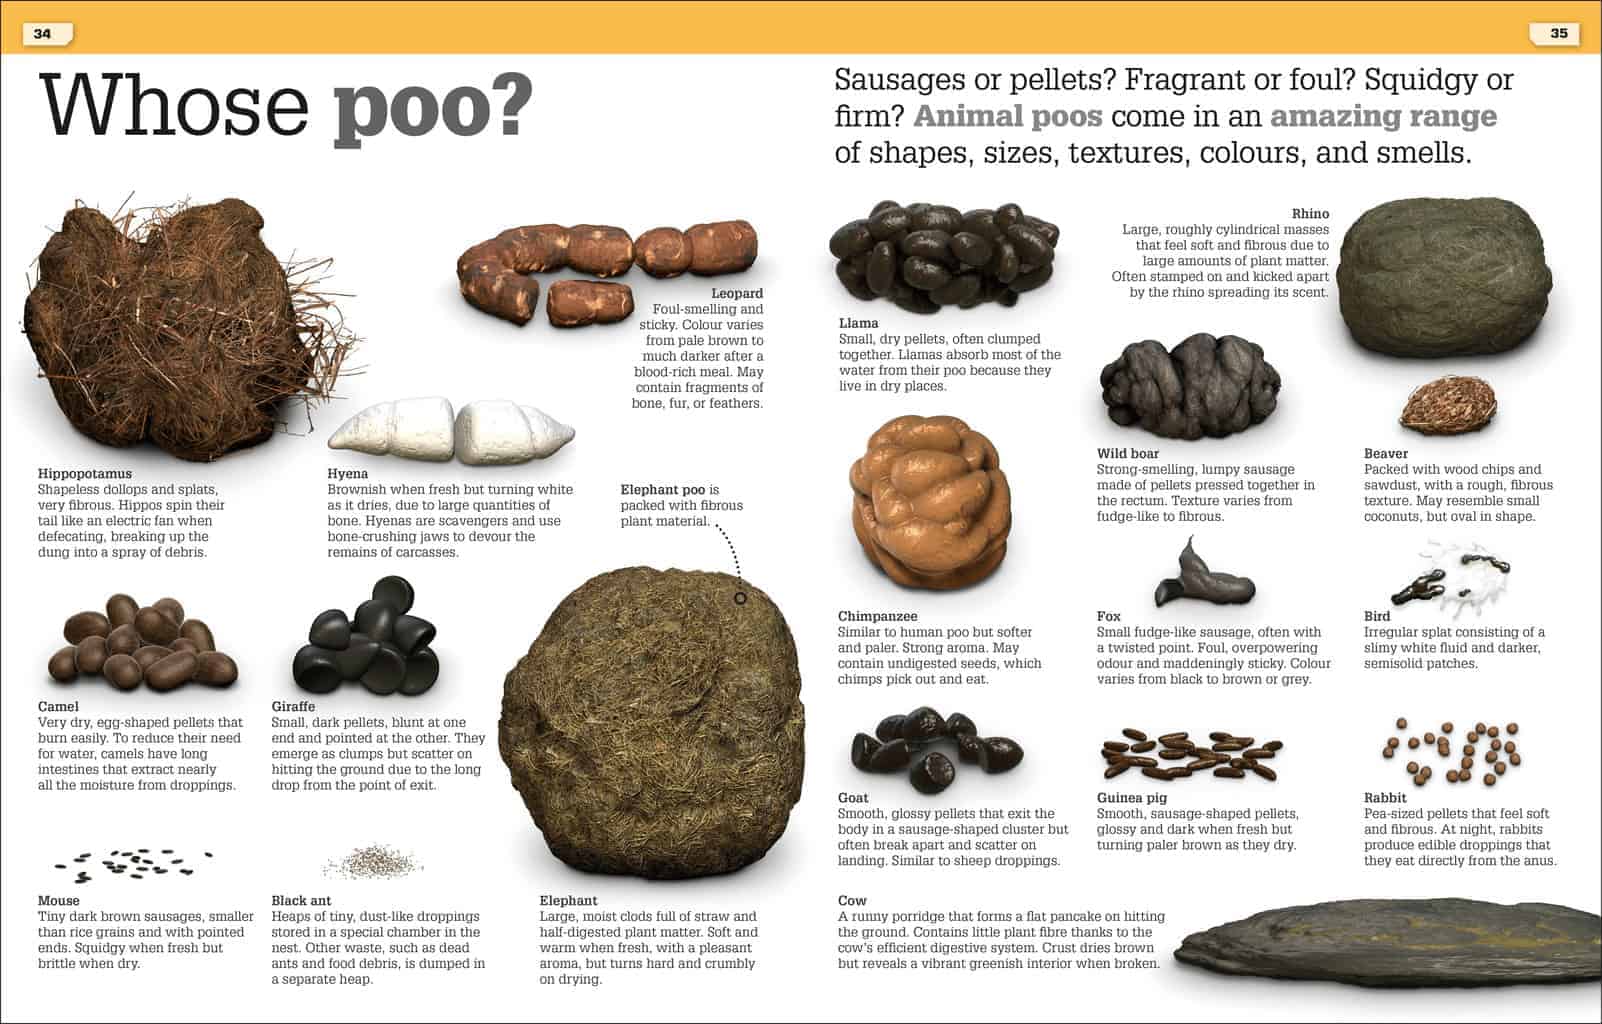 Get this brand new book about poo! It Can't Be True! Poo! from DK